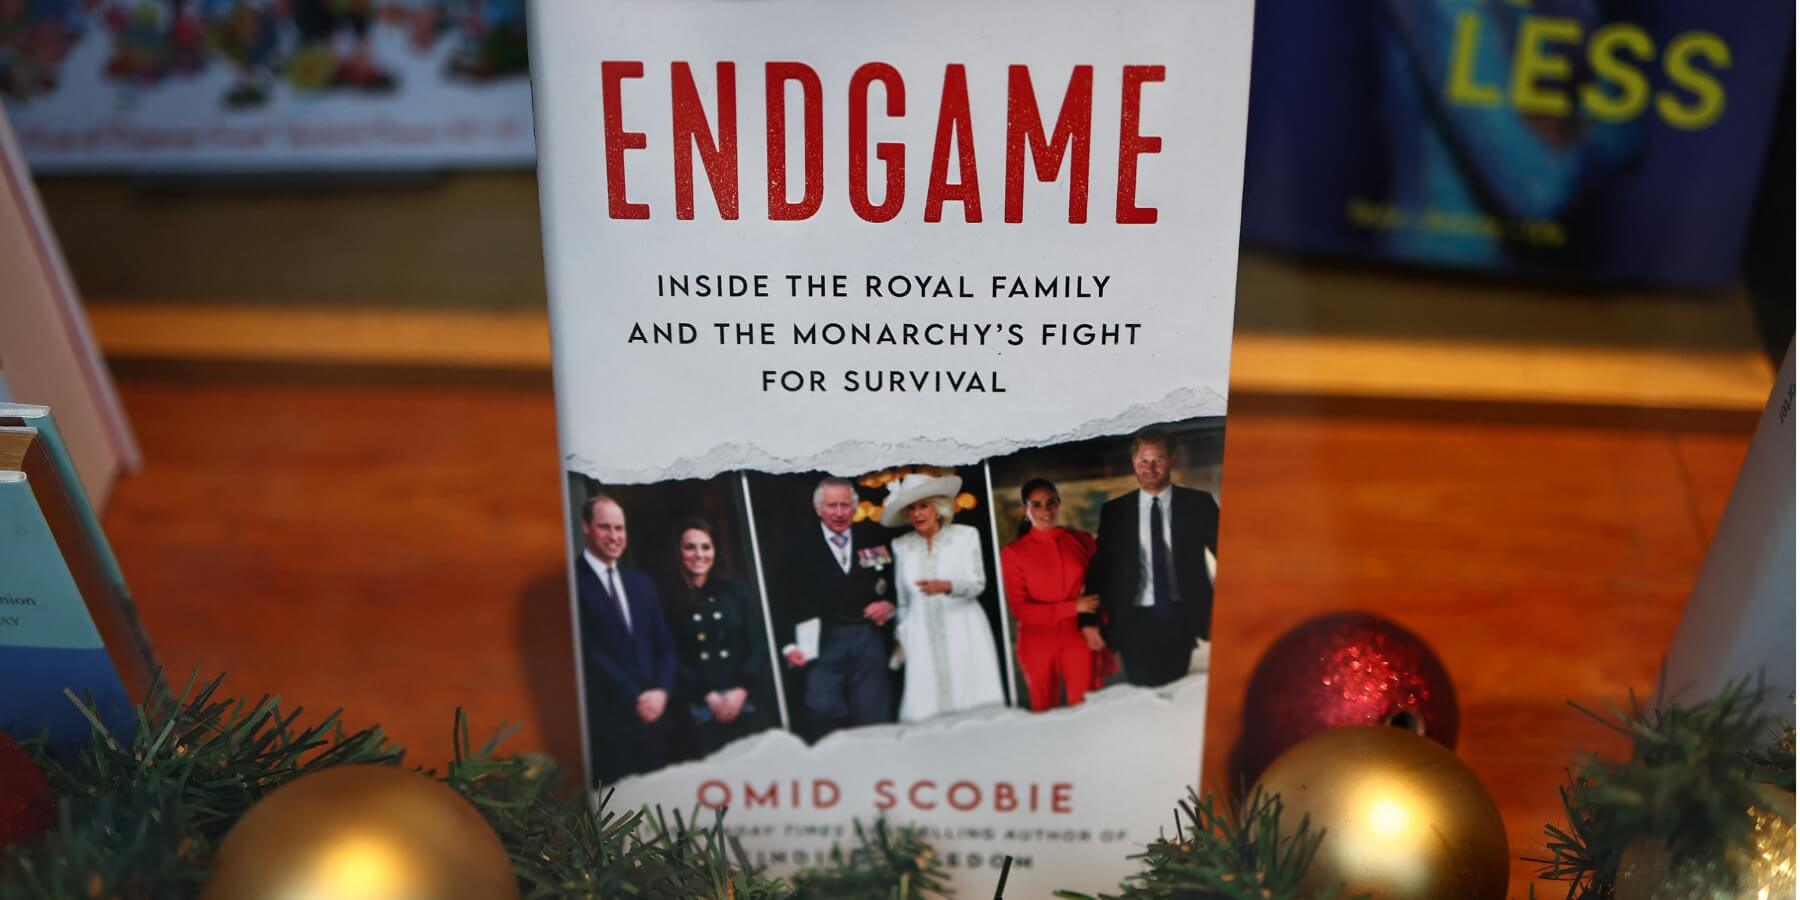 'Endgame' by Omid Scobie is the newest royal tell-all book.